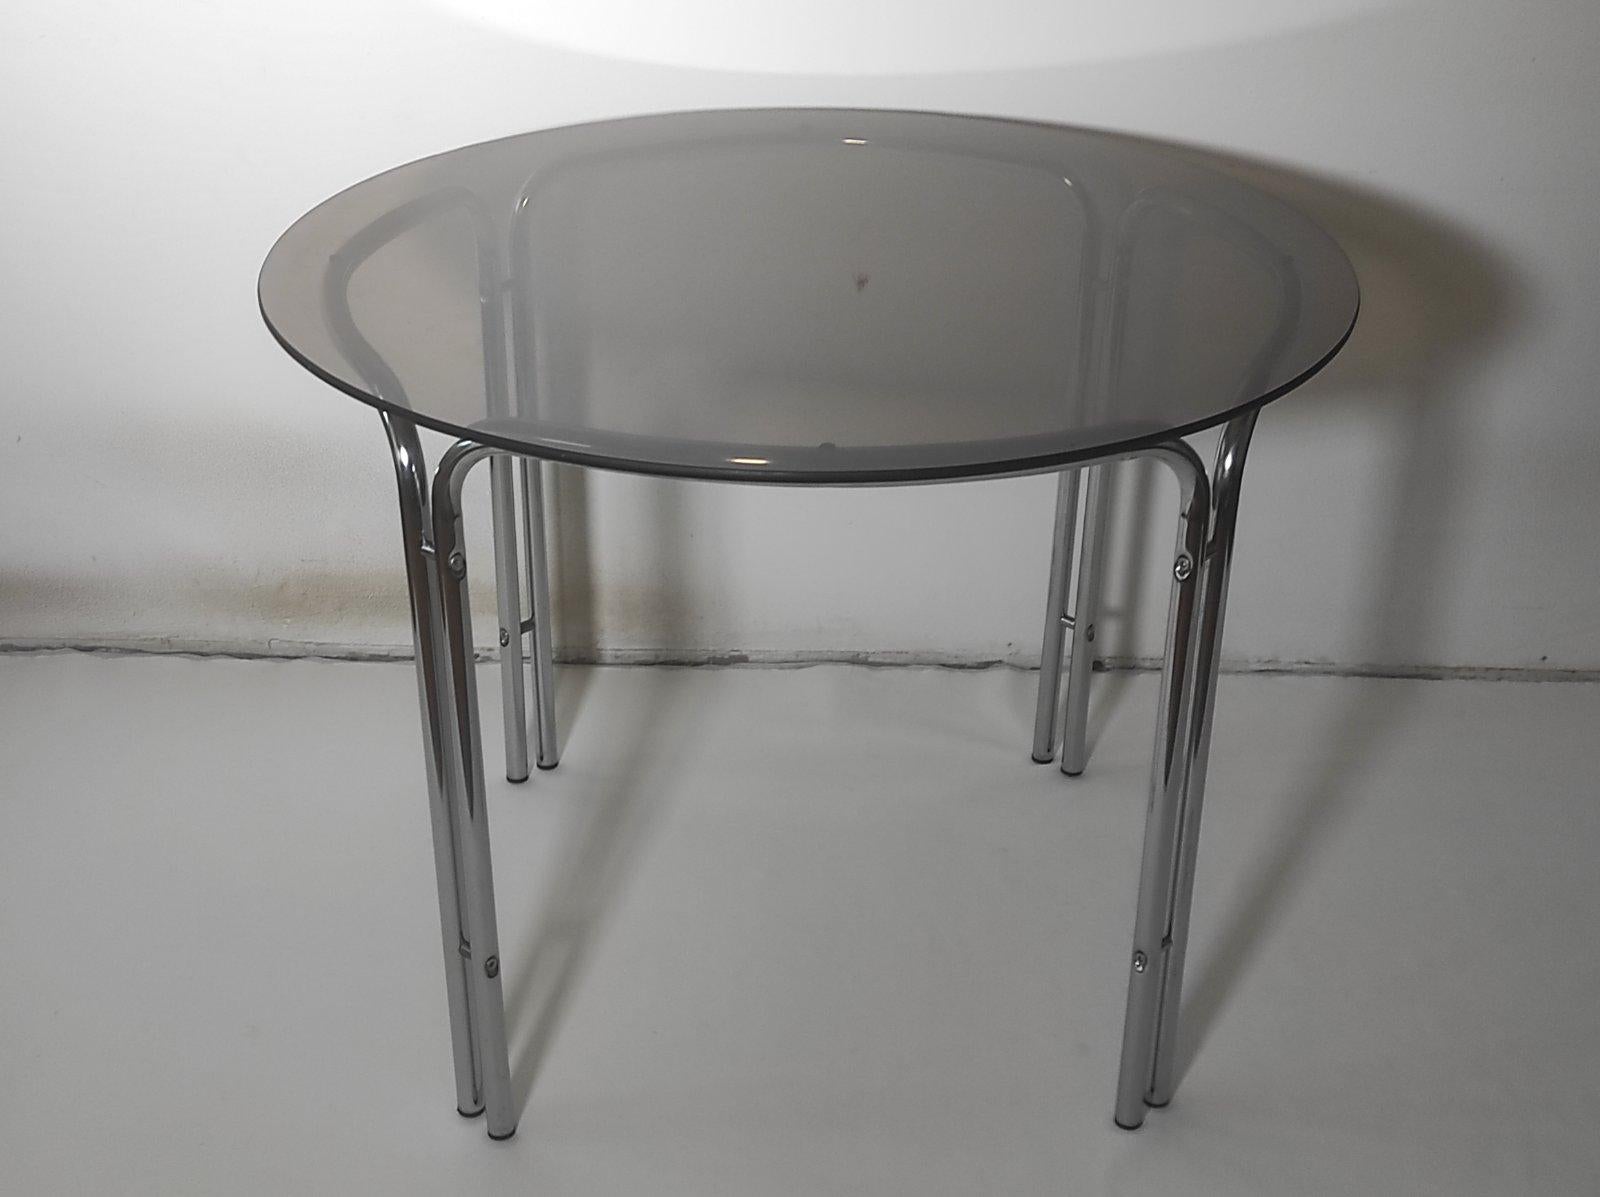 Gastolane Rinaldi Dining Table With Smoked Glass Italy 1970s